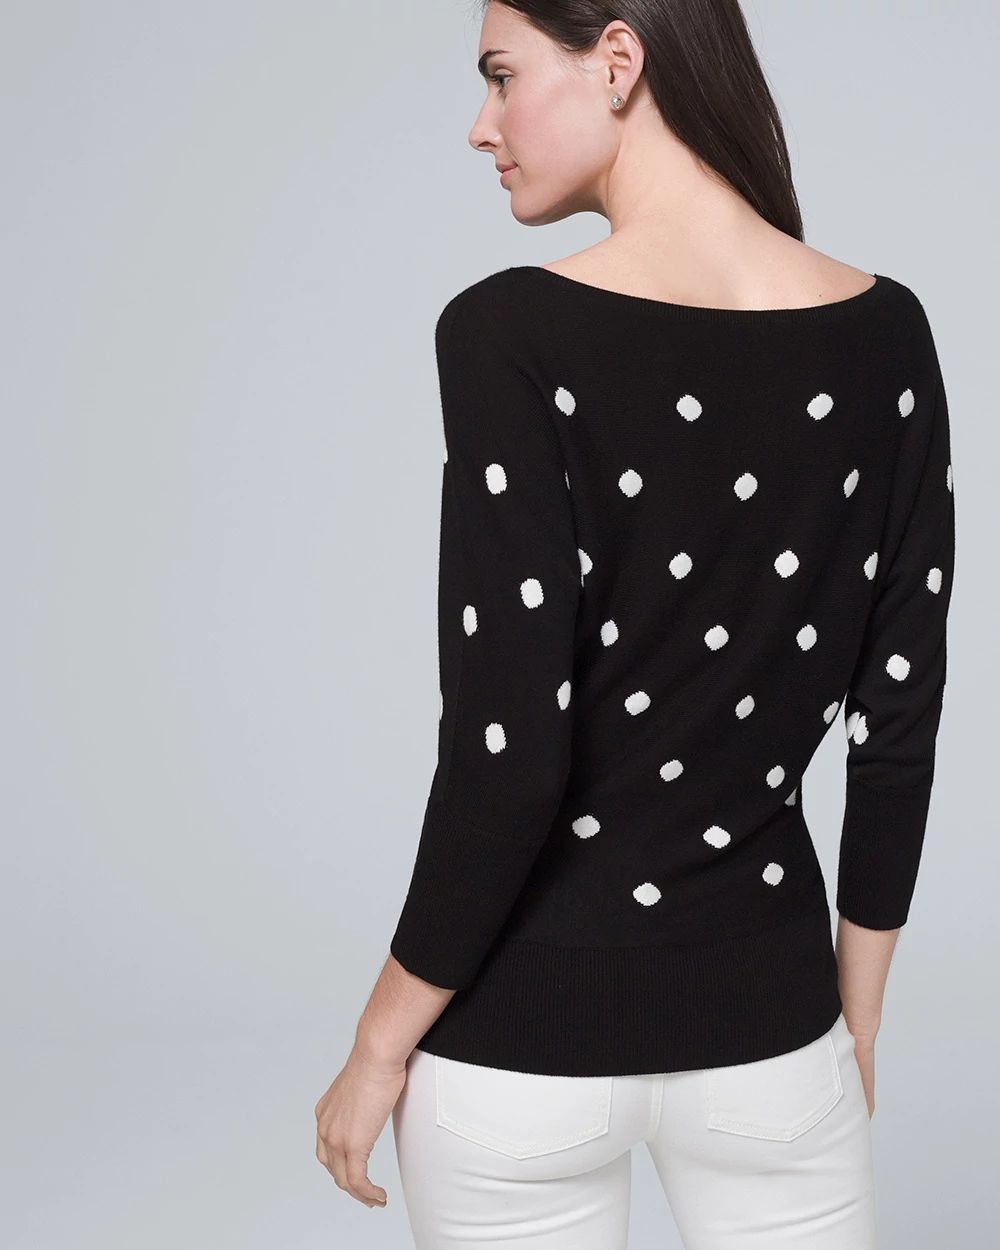 Dot Dolman Sweater click to view larger image.